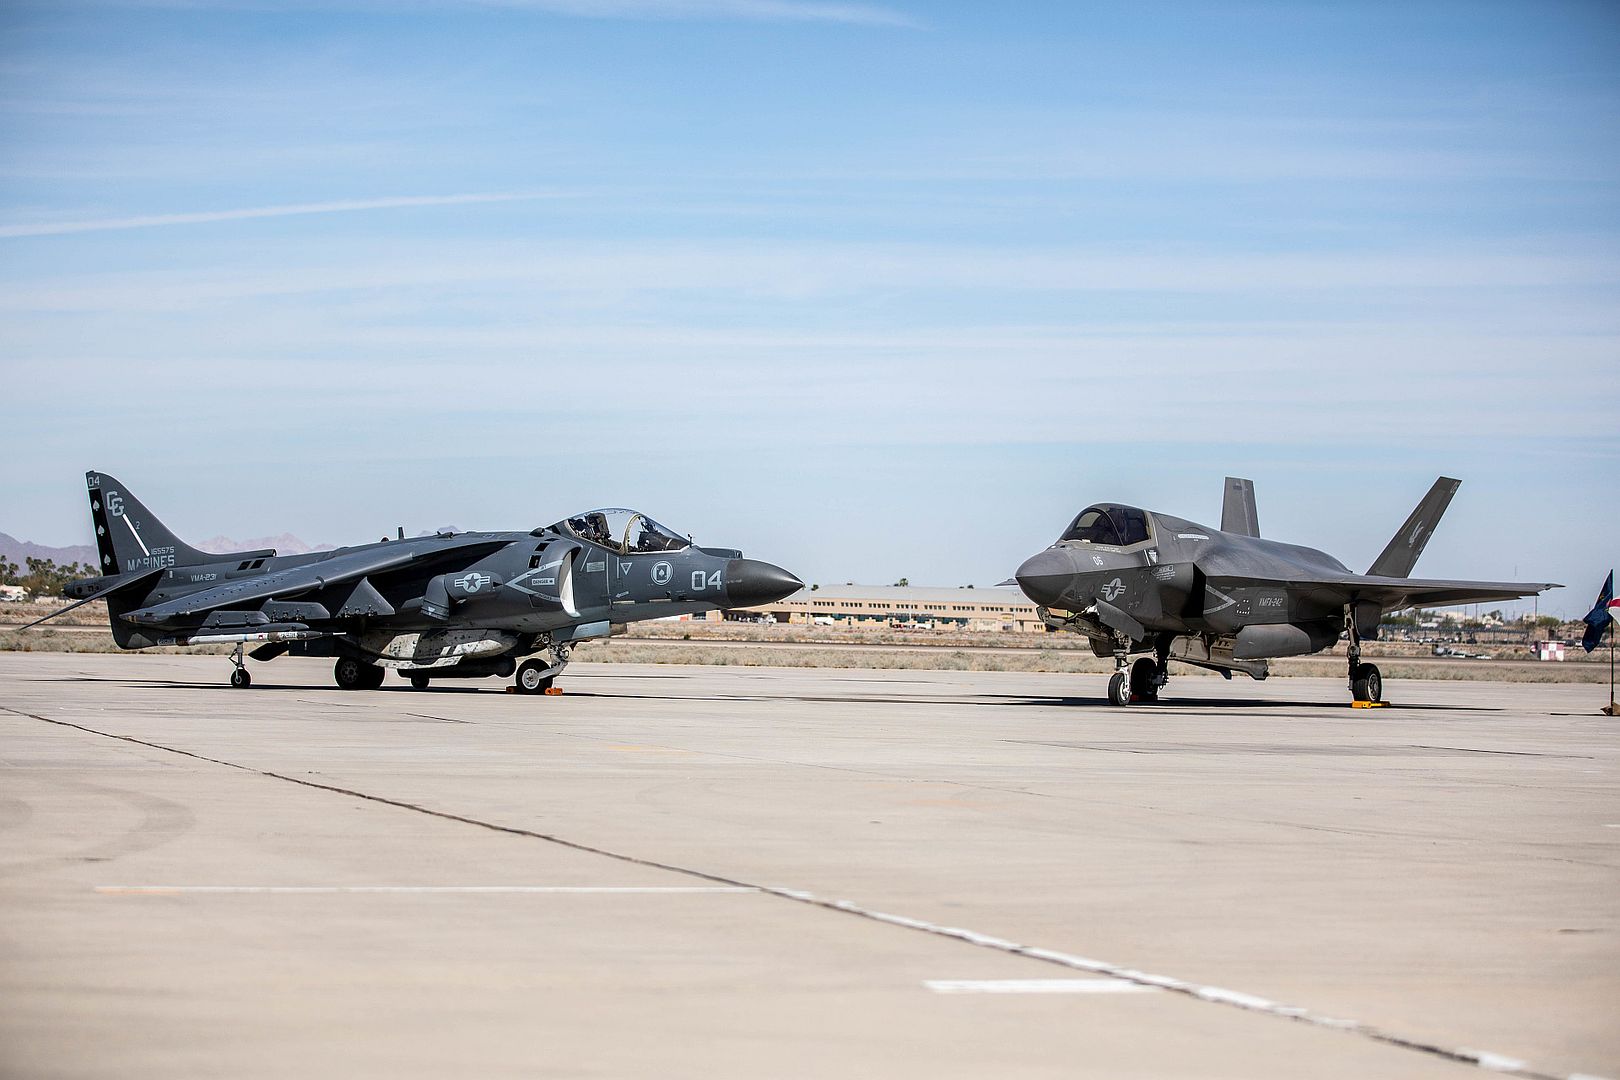 35B Lightning II Are Staged During The Change Of Command And Redesignation Ceremony For Marine Fighter Attack Squadron VMFA 214 Aboard Marine Corps Air Station Yuma Arizona March 25 2022